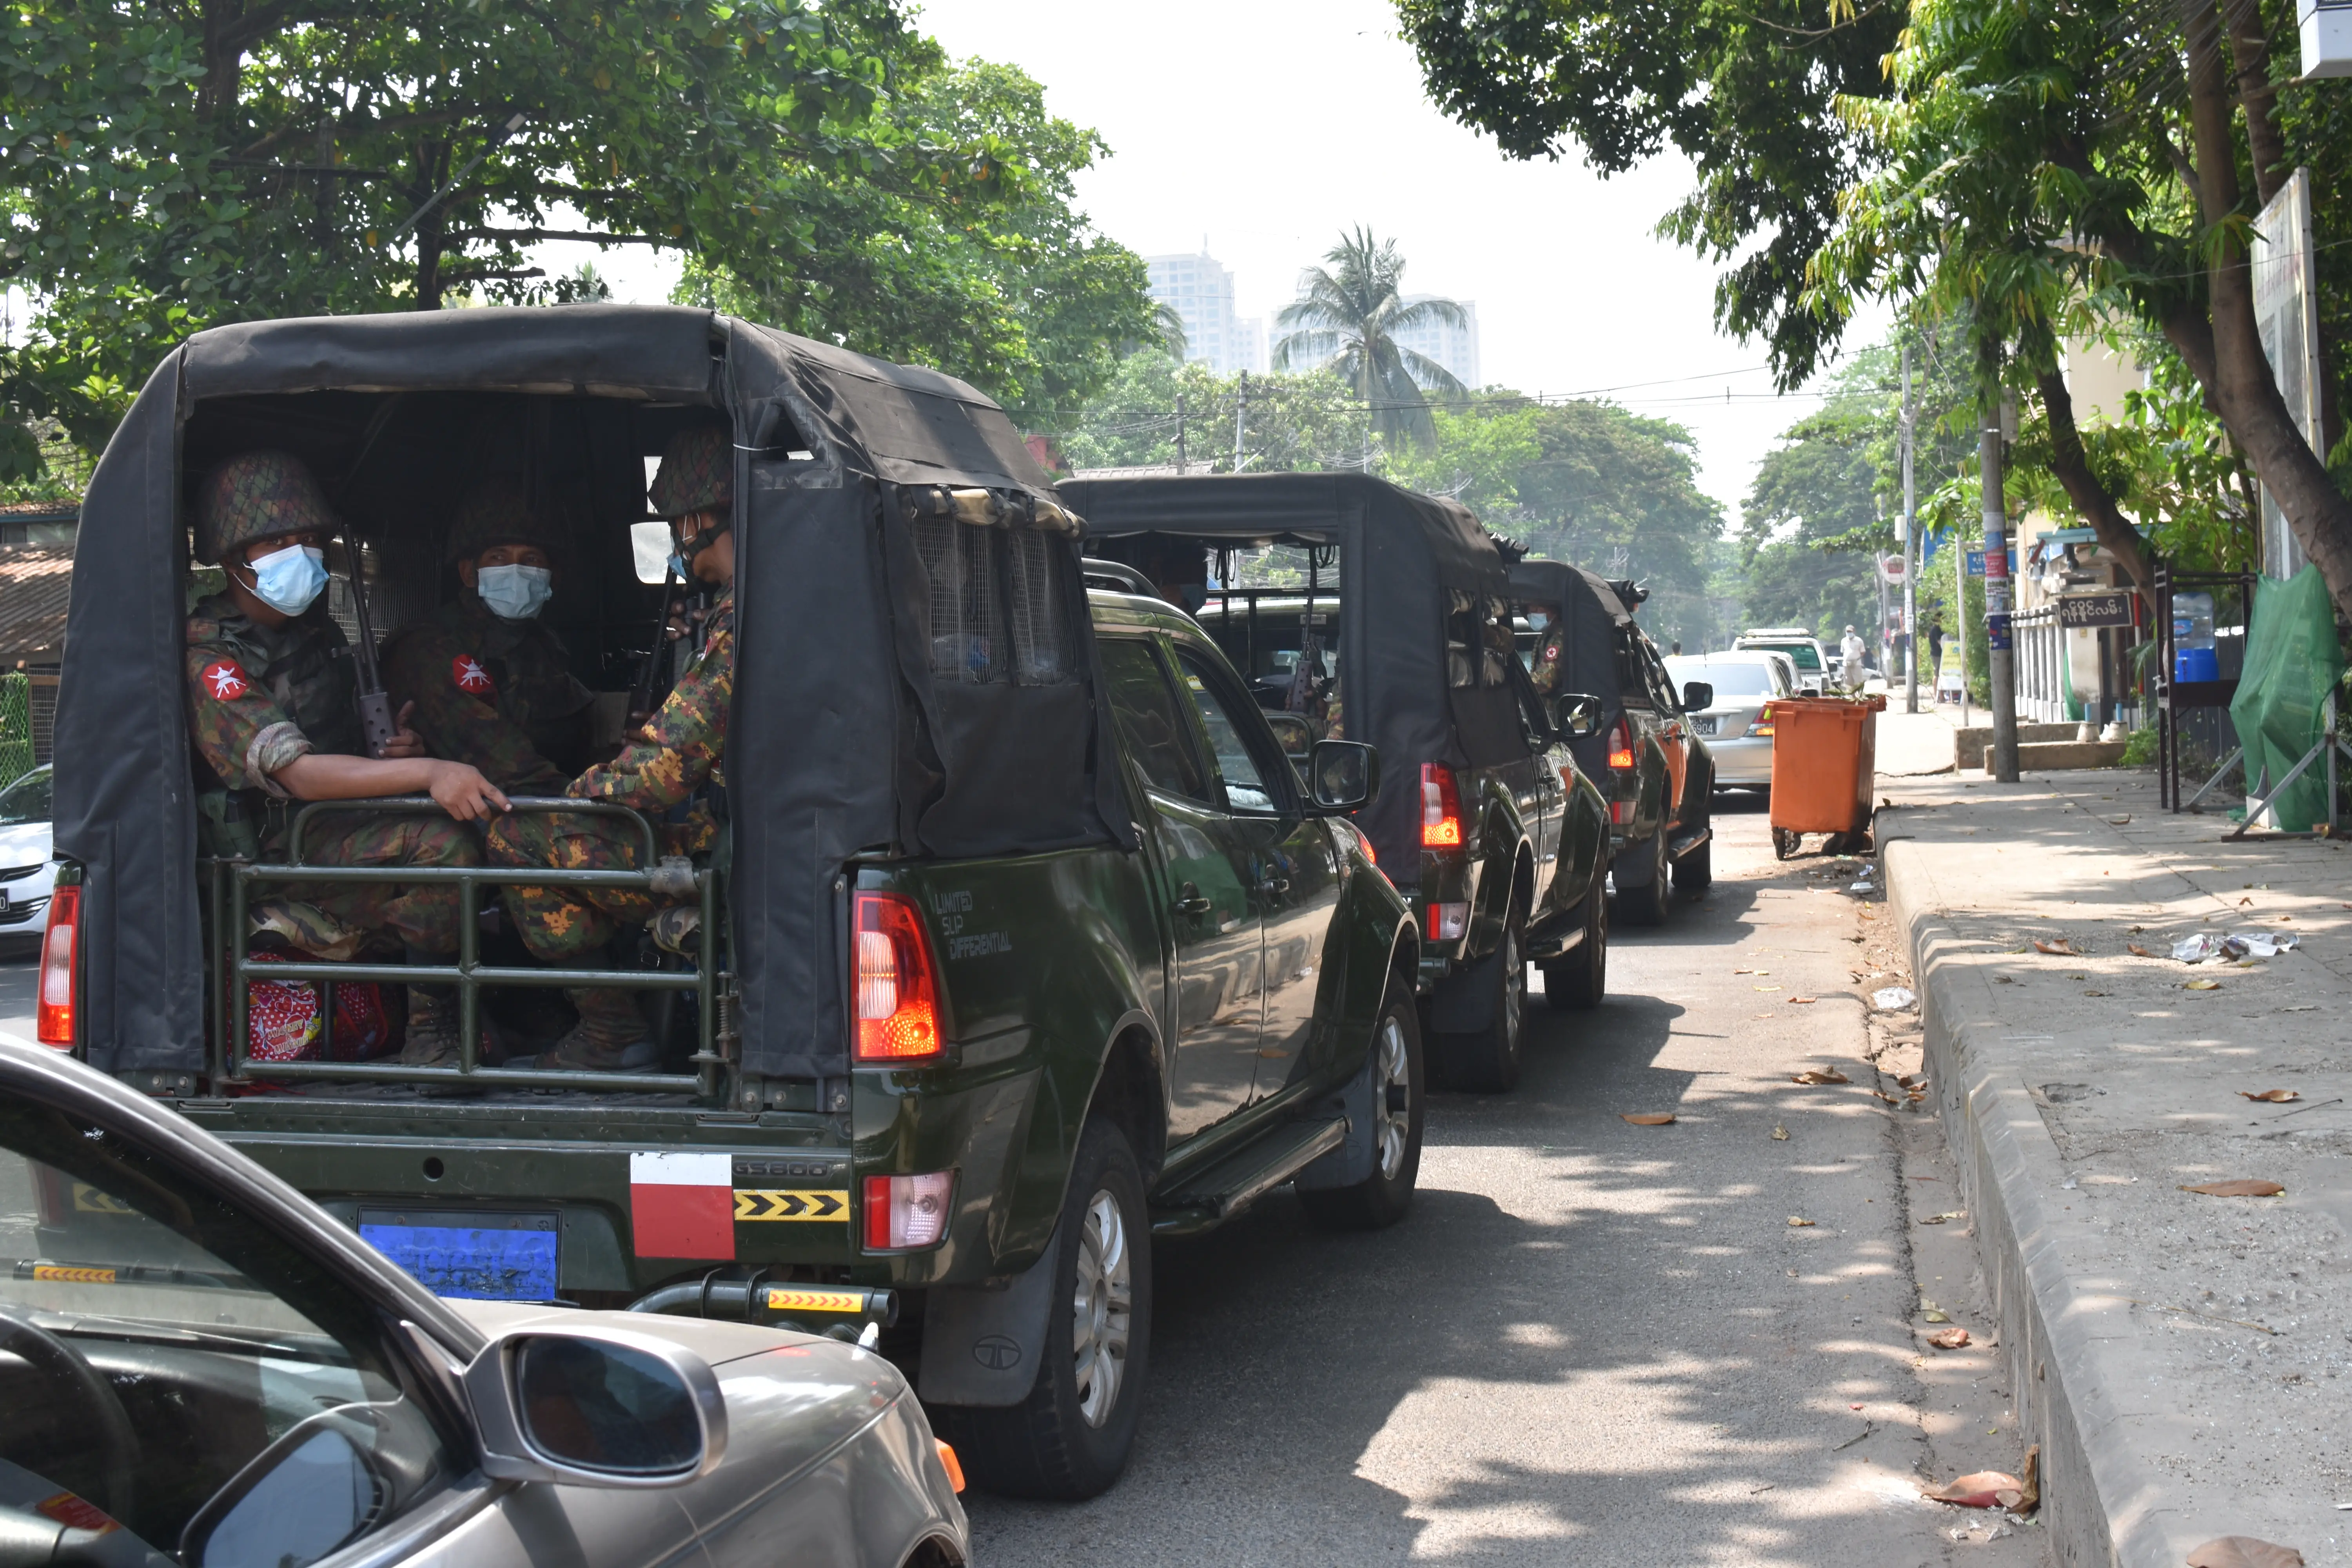 Soldiers wearing medical masks can be seen from the back of a truck in a convoy.